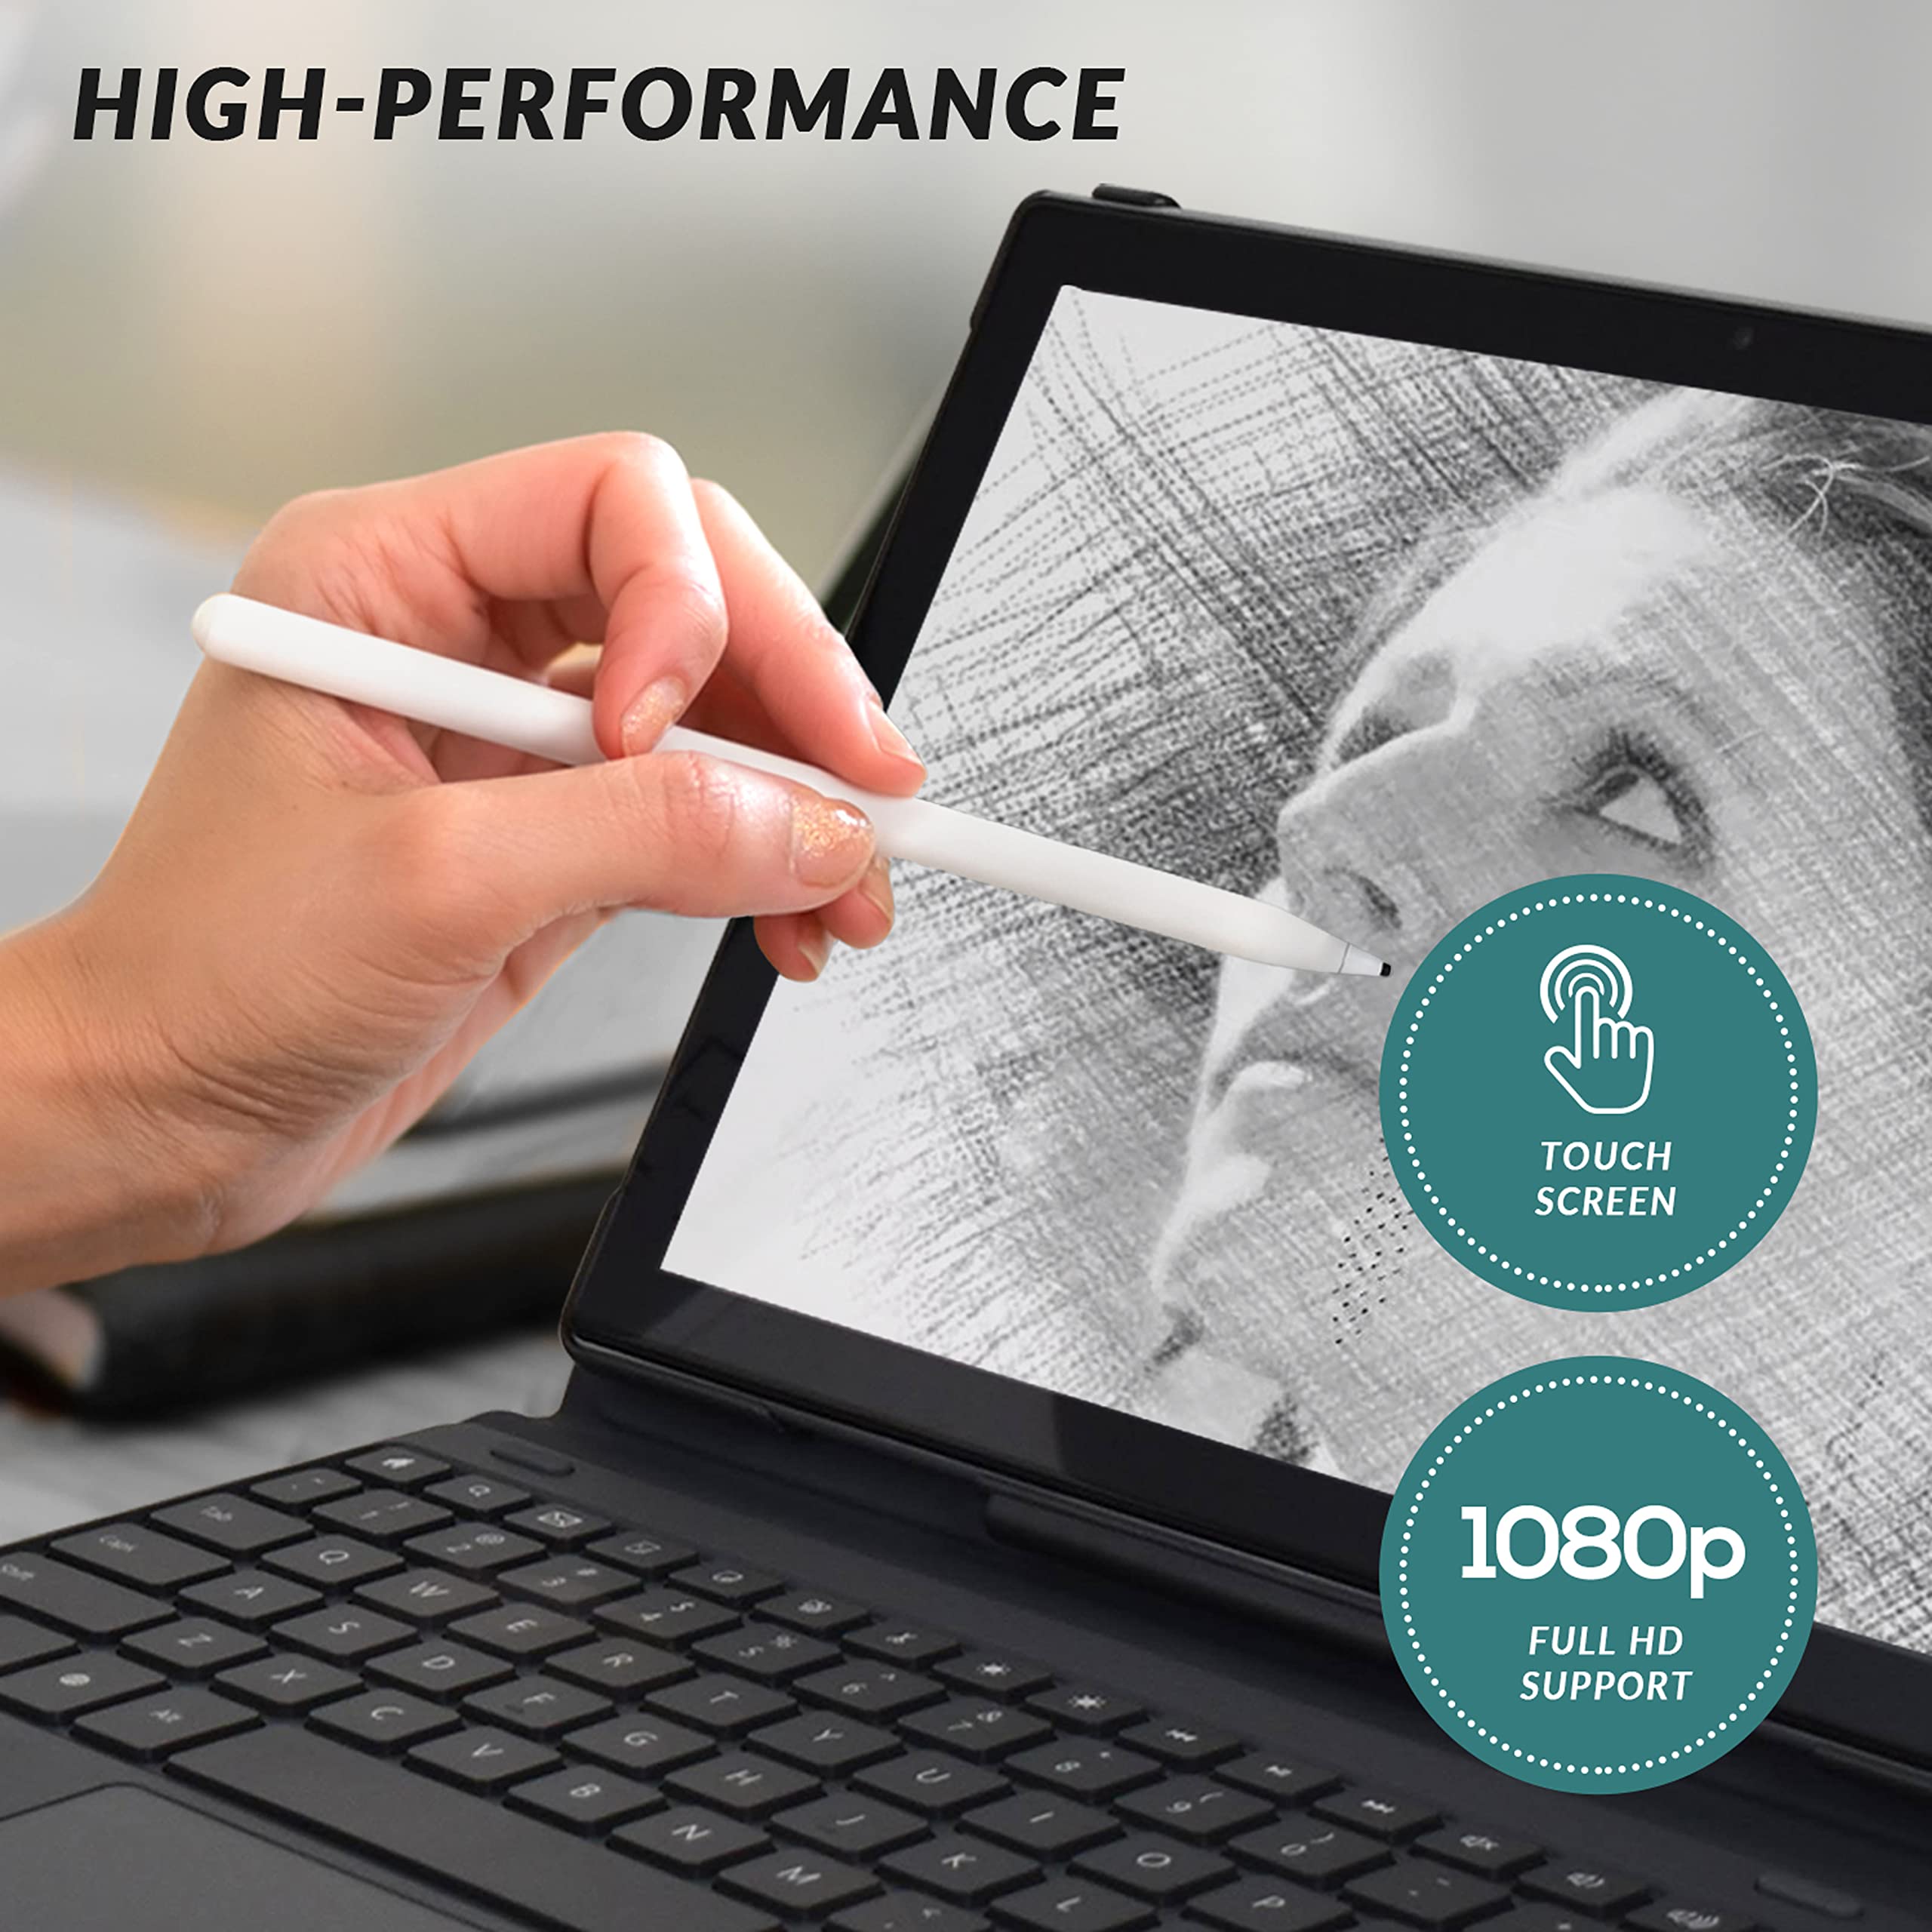 Pyle 1080p HD Display, 5000 mAH, Dual 10.1 Inch Android Tablet -2 in 1 Tablet Camera, WiFi Compatibility, Quad-Core Processor, 2GB RAM, 32GB Storage,Magnetic Keyboard,Stylus Pen & Case Included-Silver